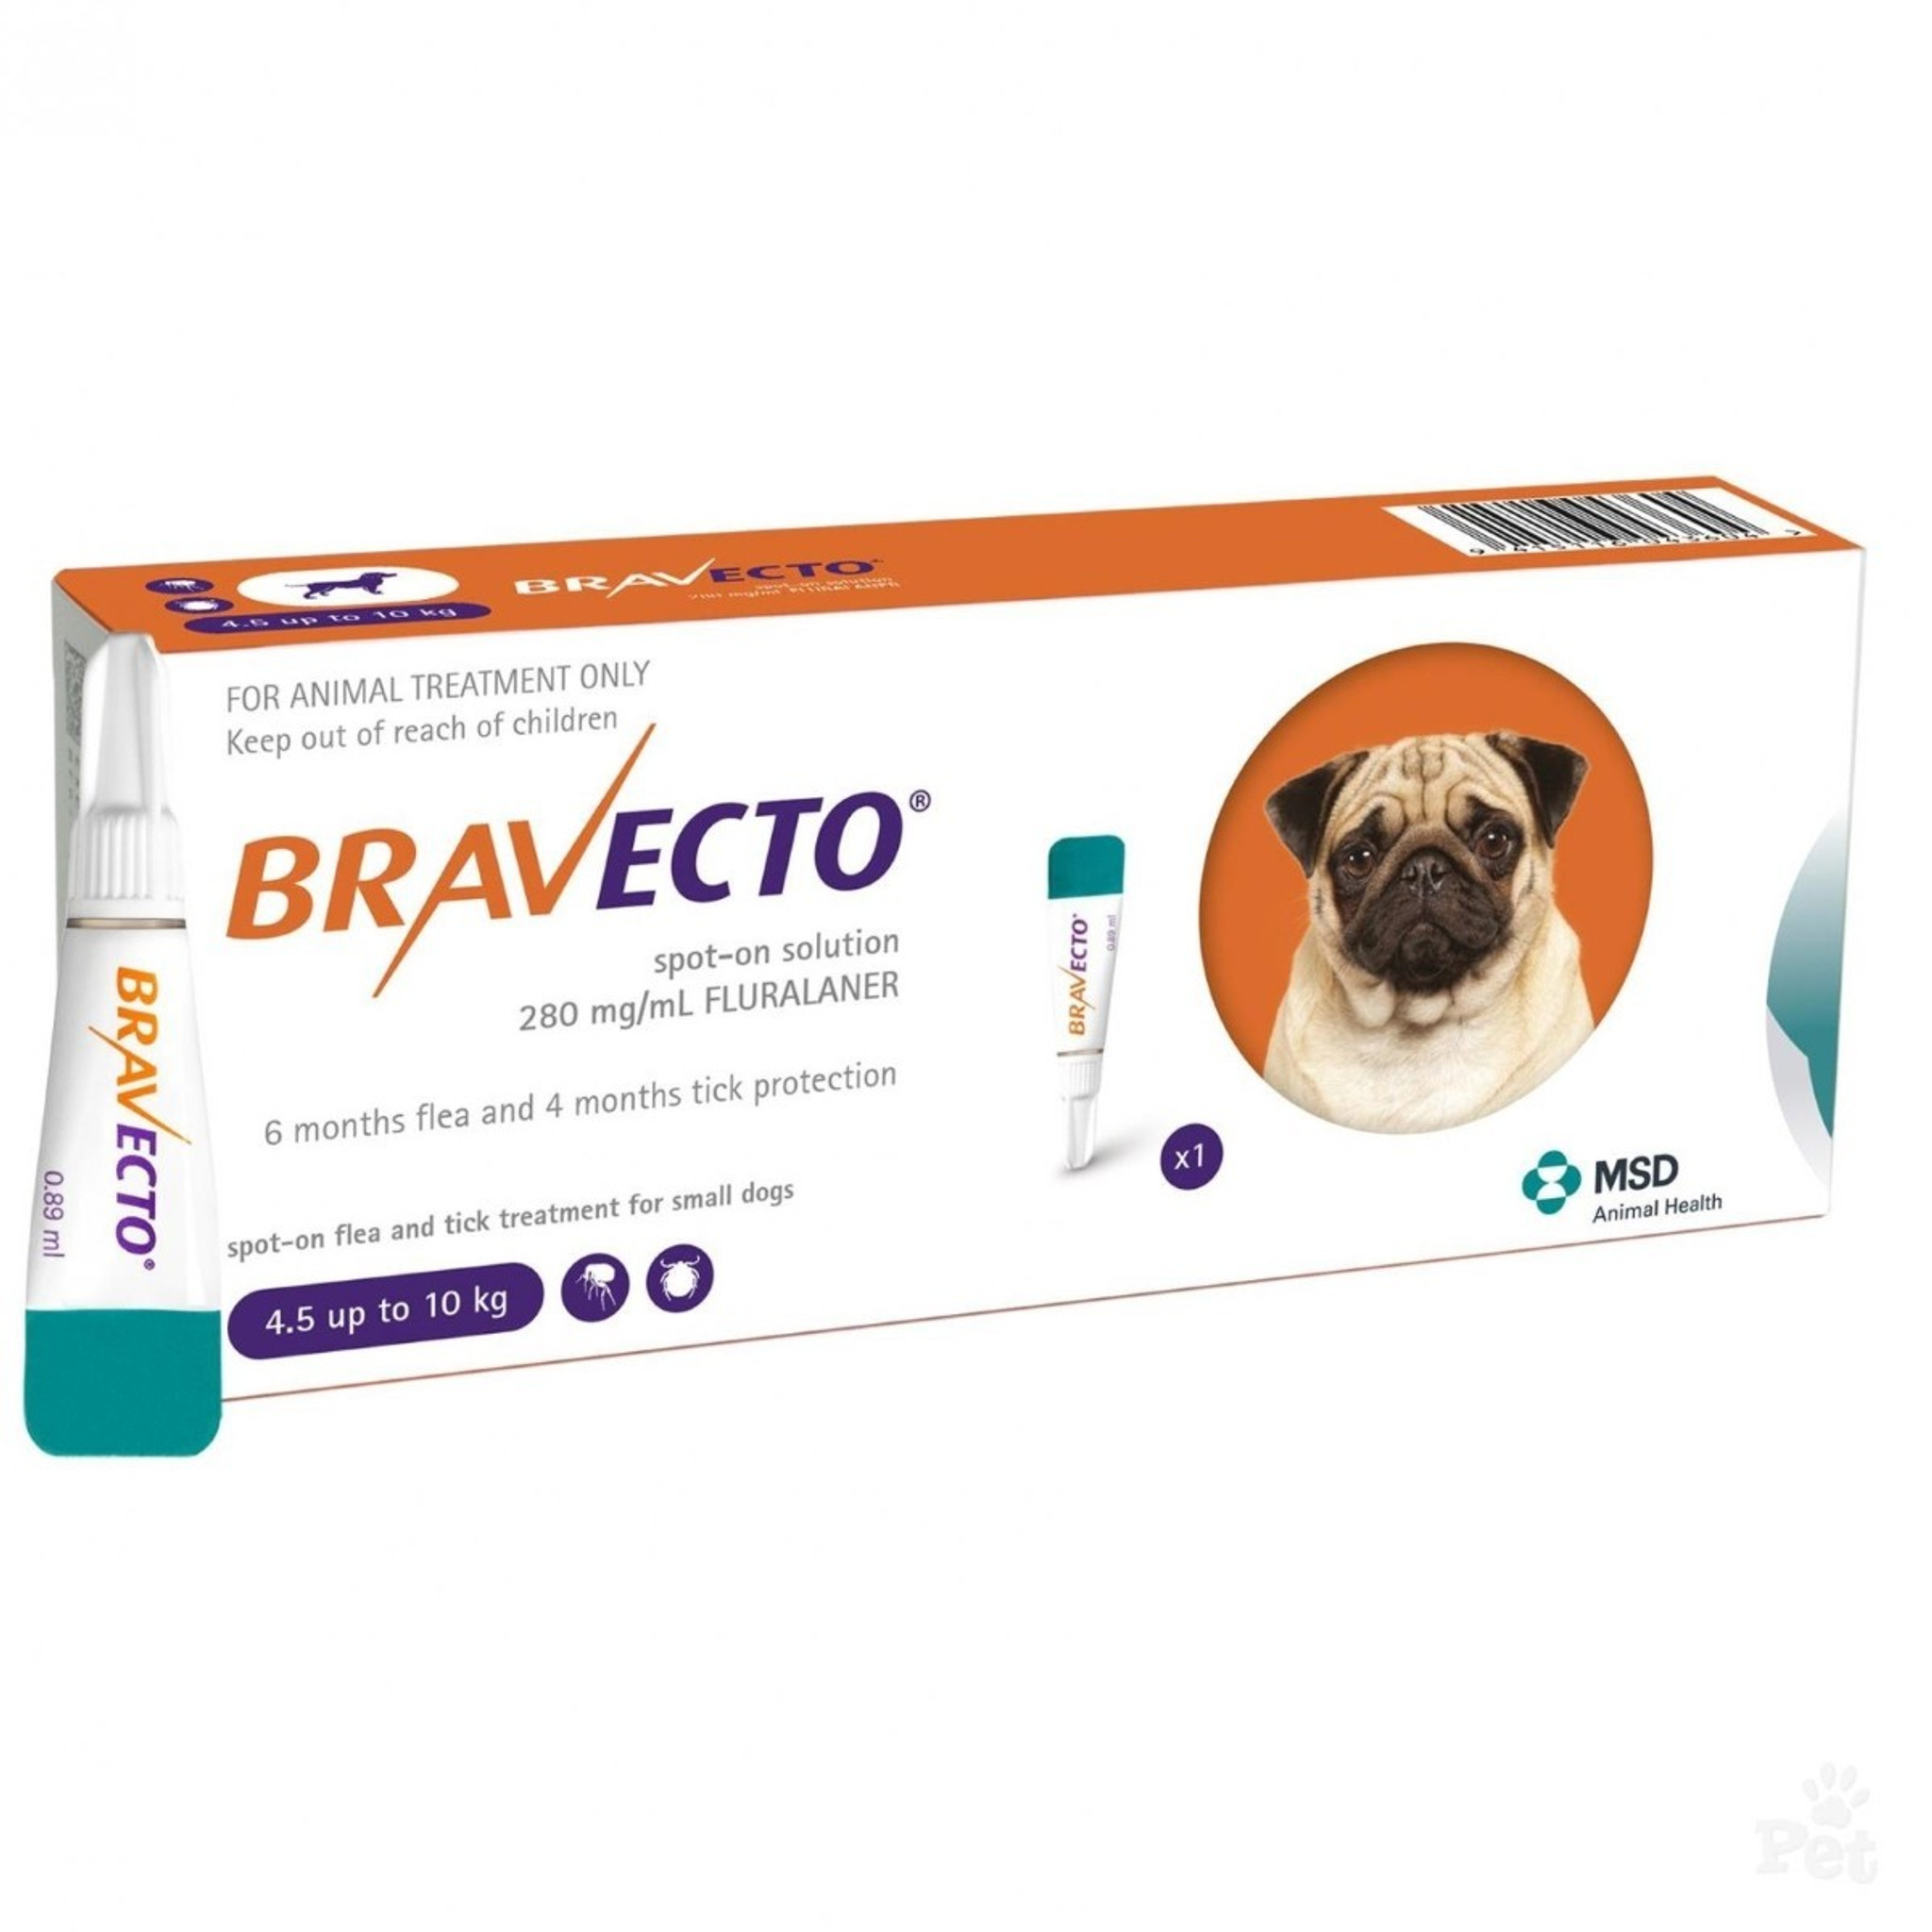 Bravecto Topical Solution for Dogs 9.922 lbs (4.510 kg) 1 Tube